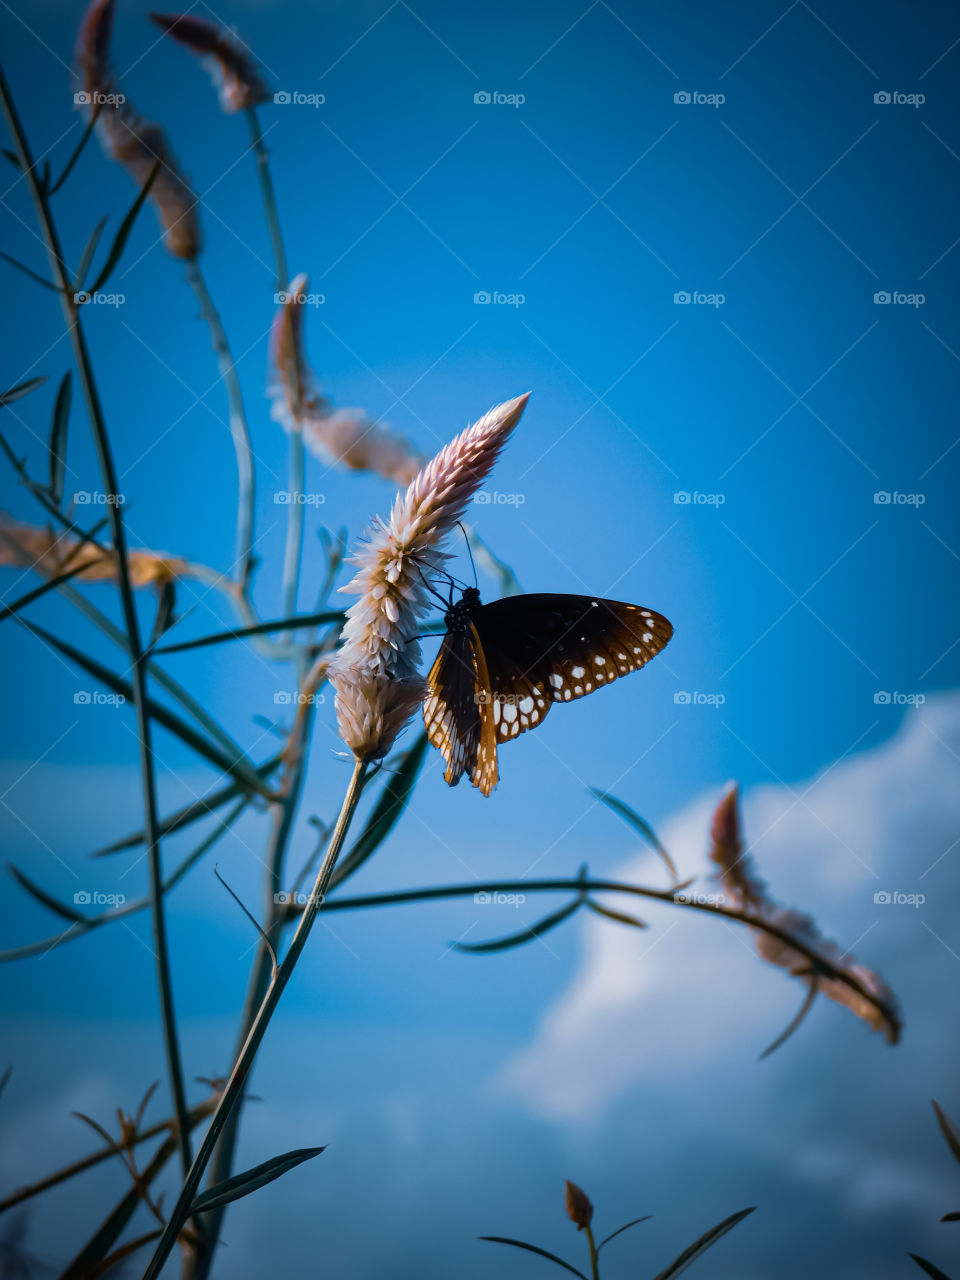 Butterfly photography, Beautiful butterfly sitting on celocia grass having blue coloured background.